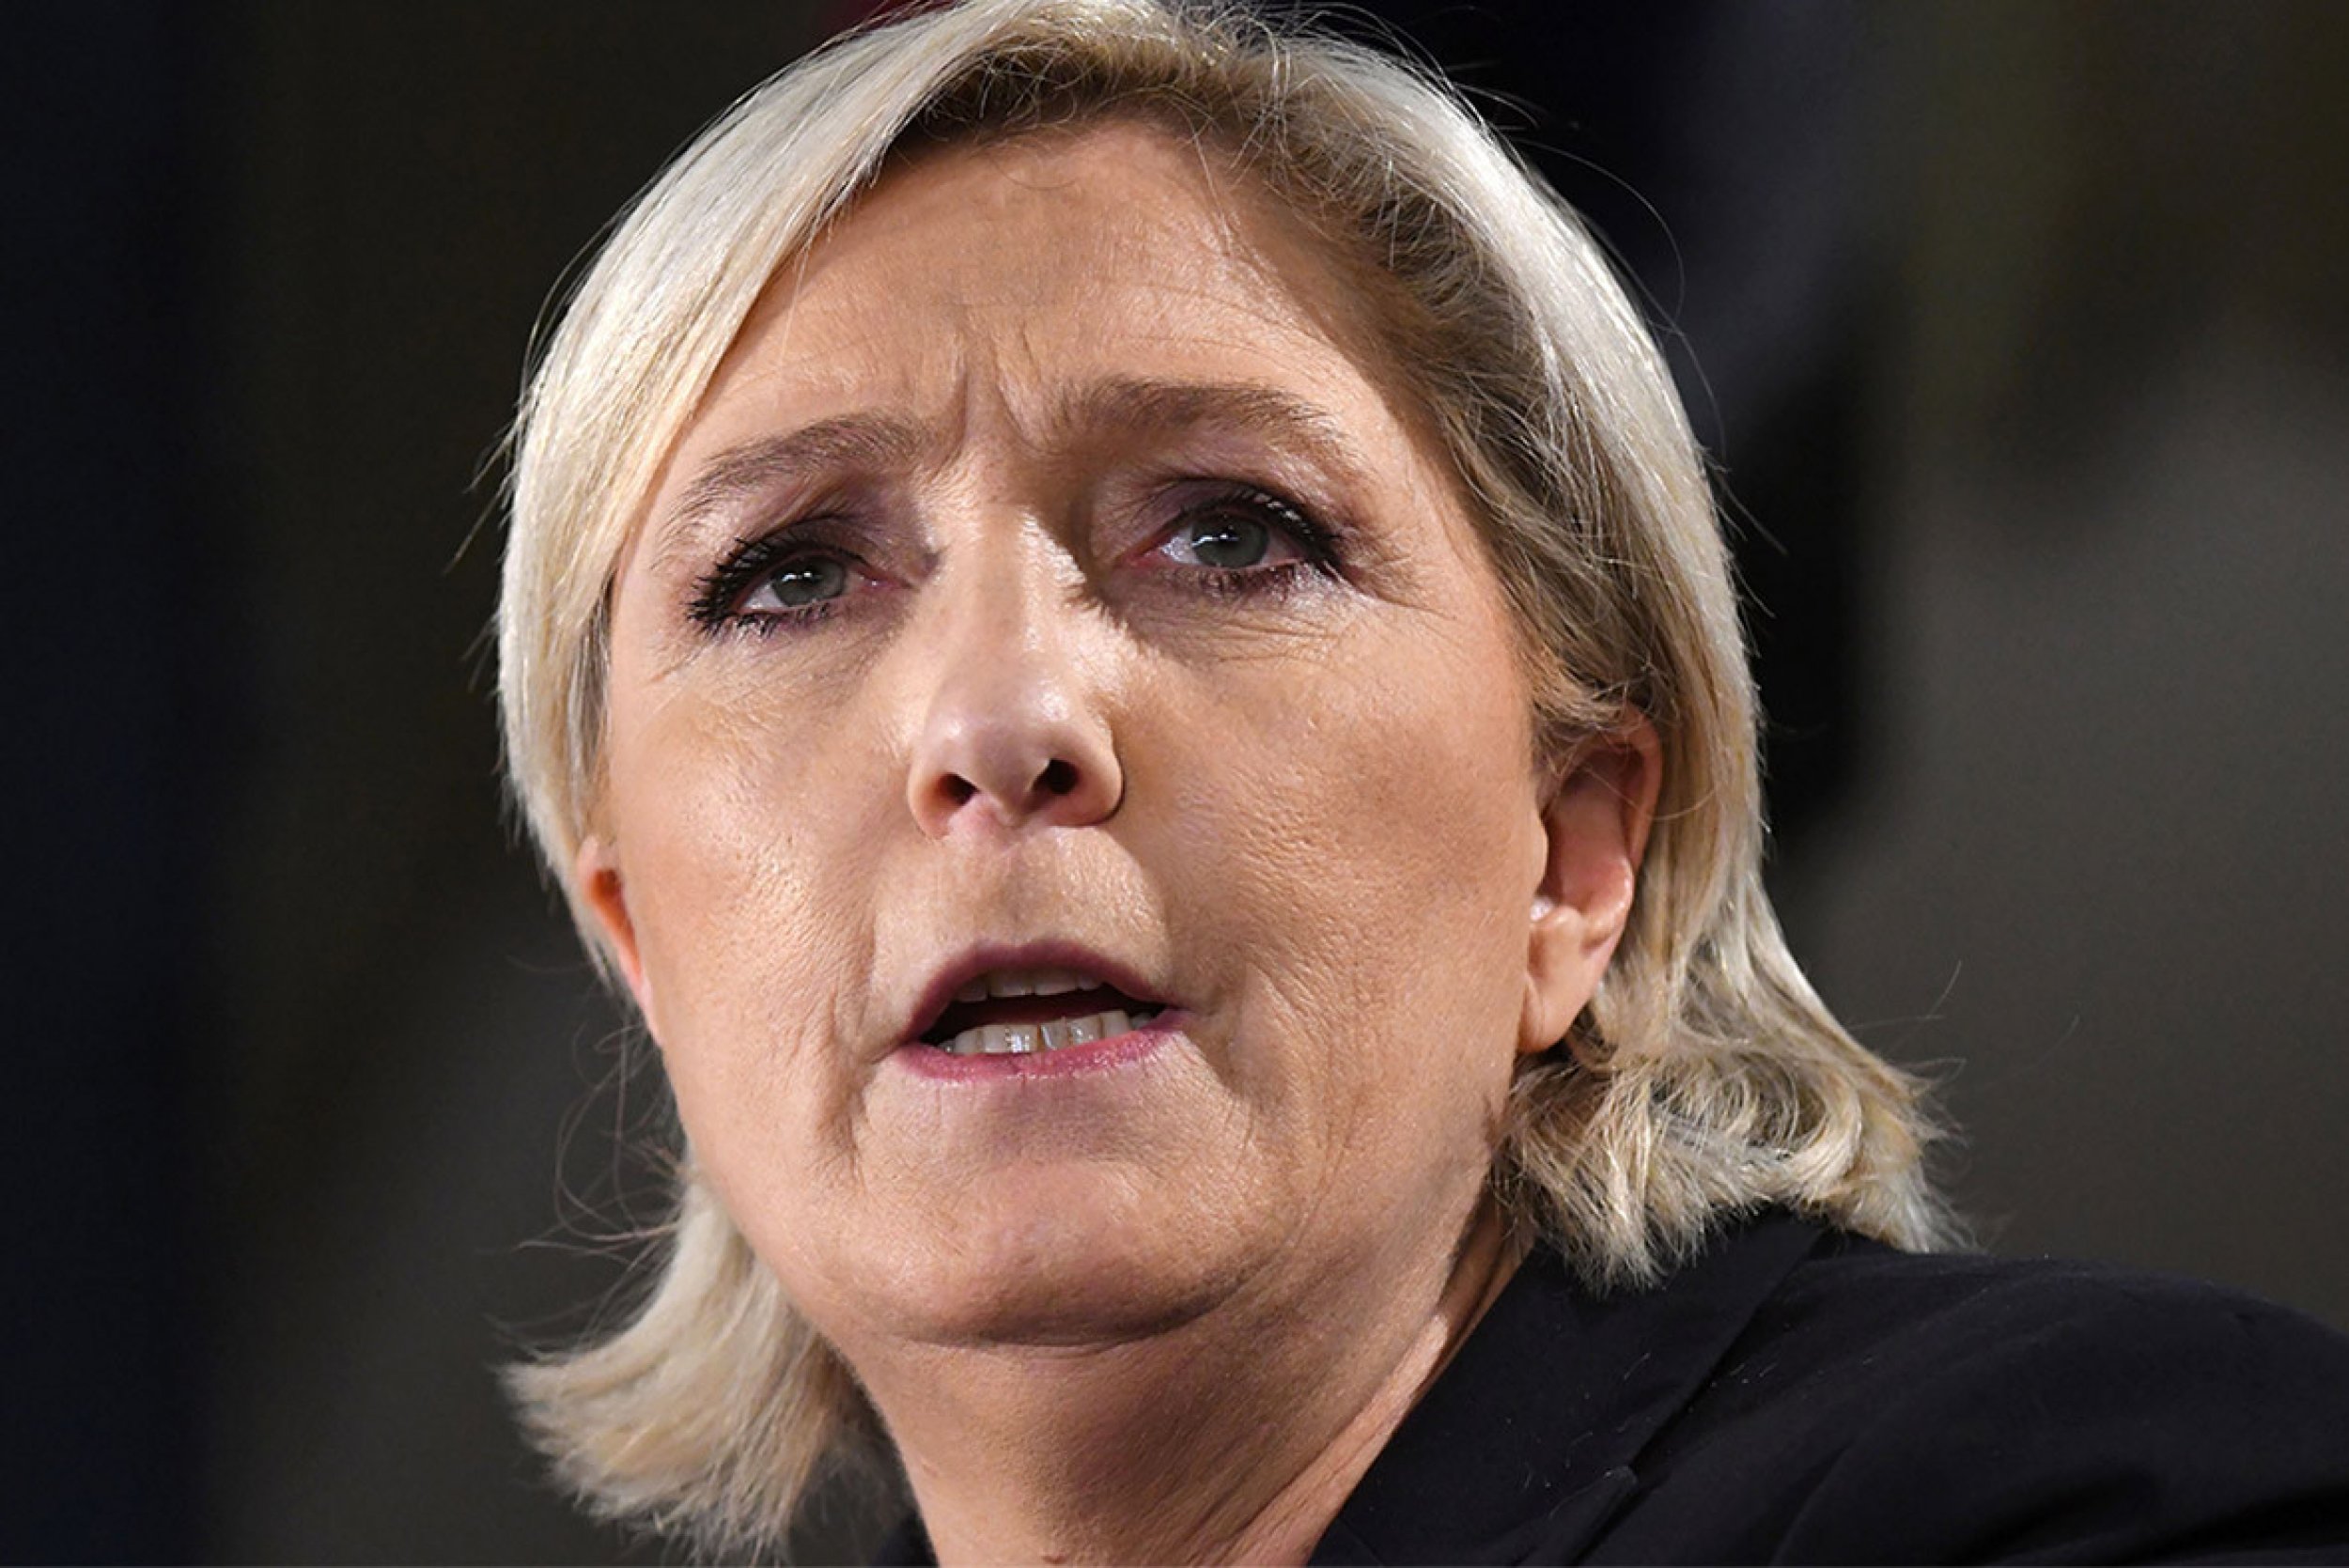 Front National presidential candidate Marine Le Pen claims there could be further attacks ahead of French election